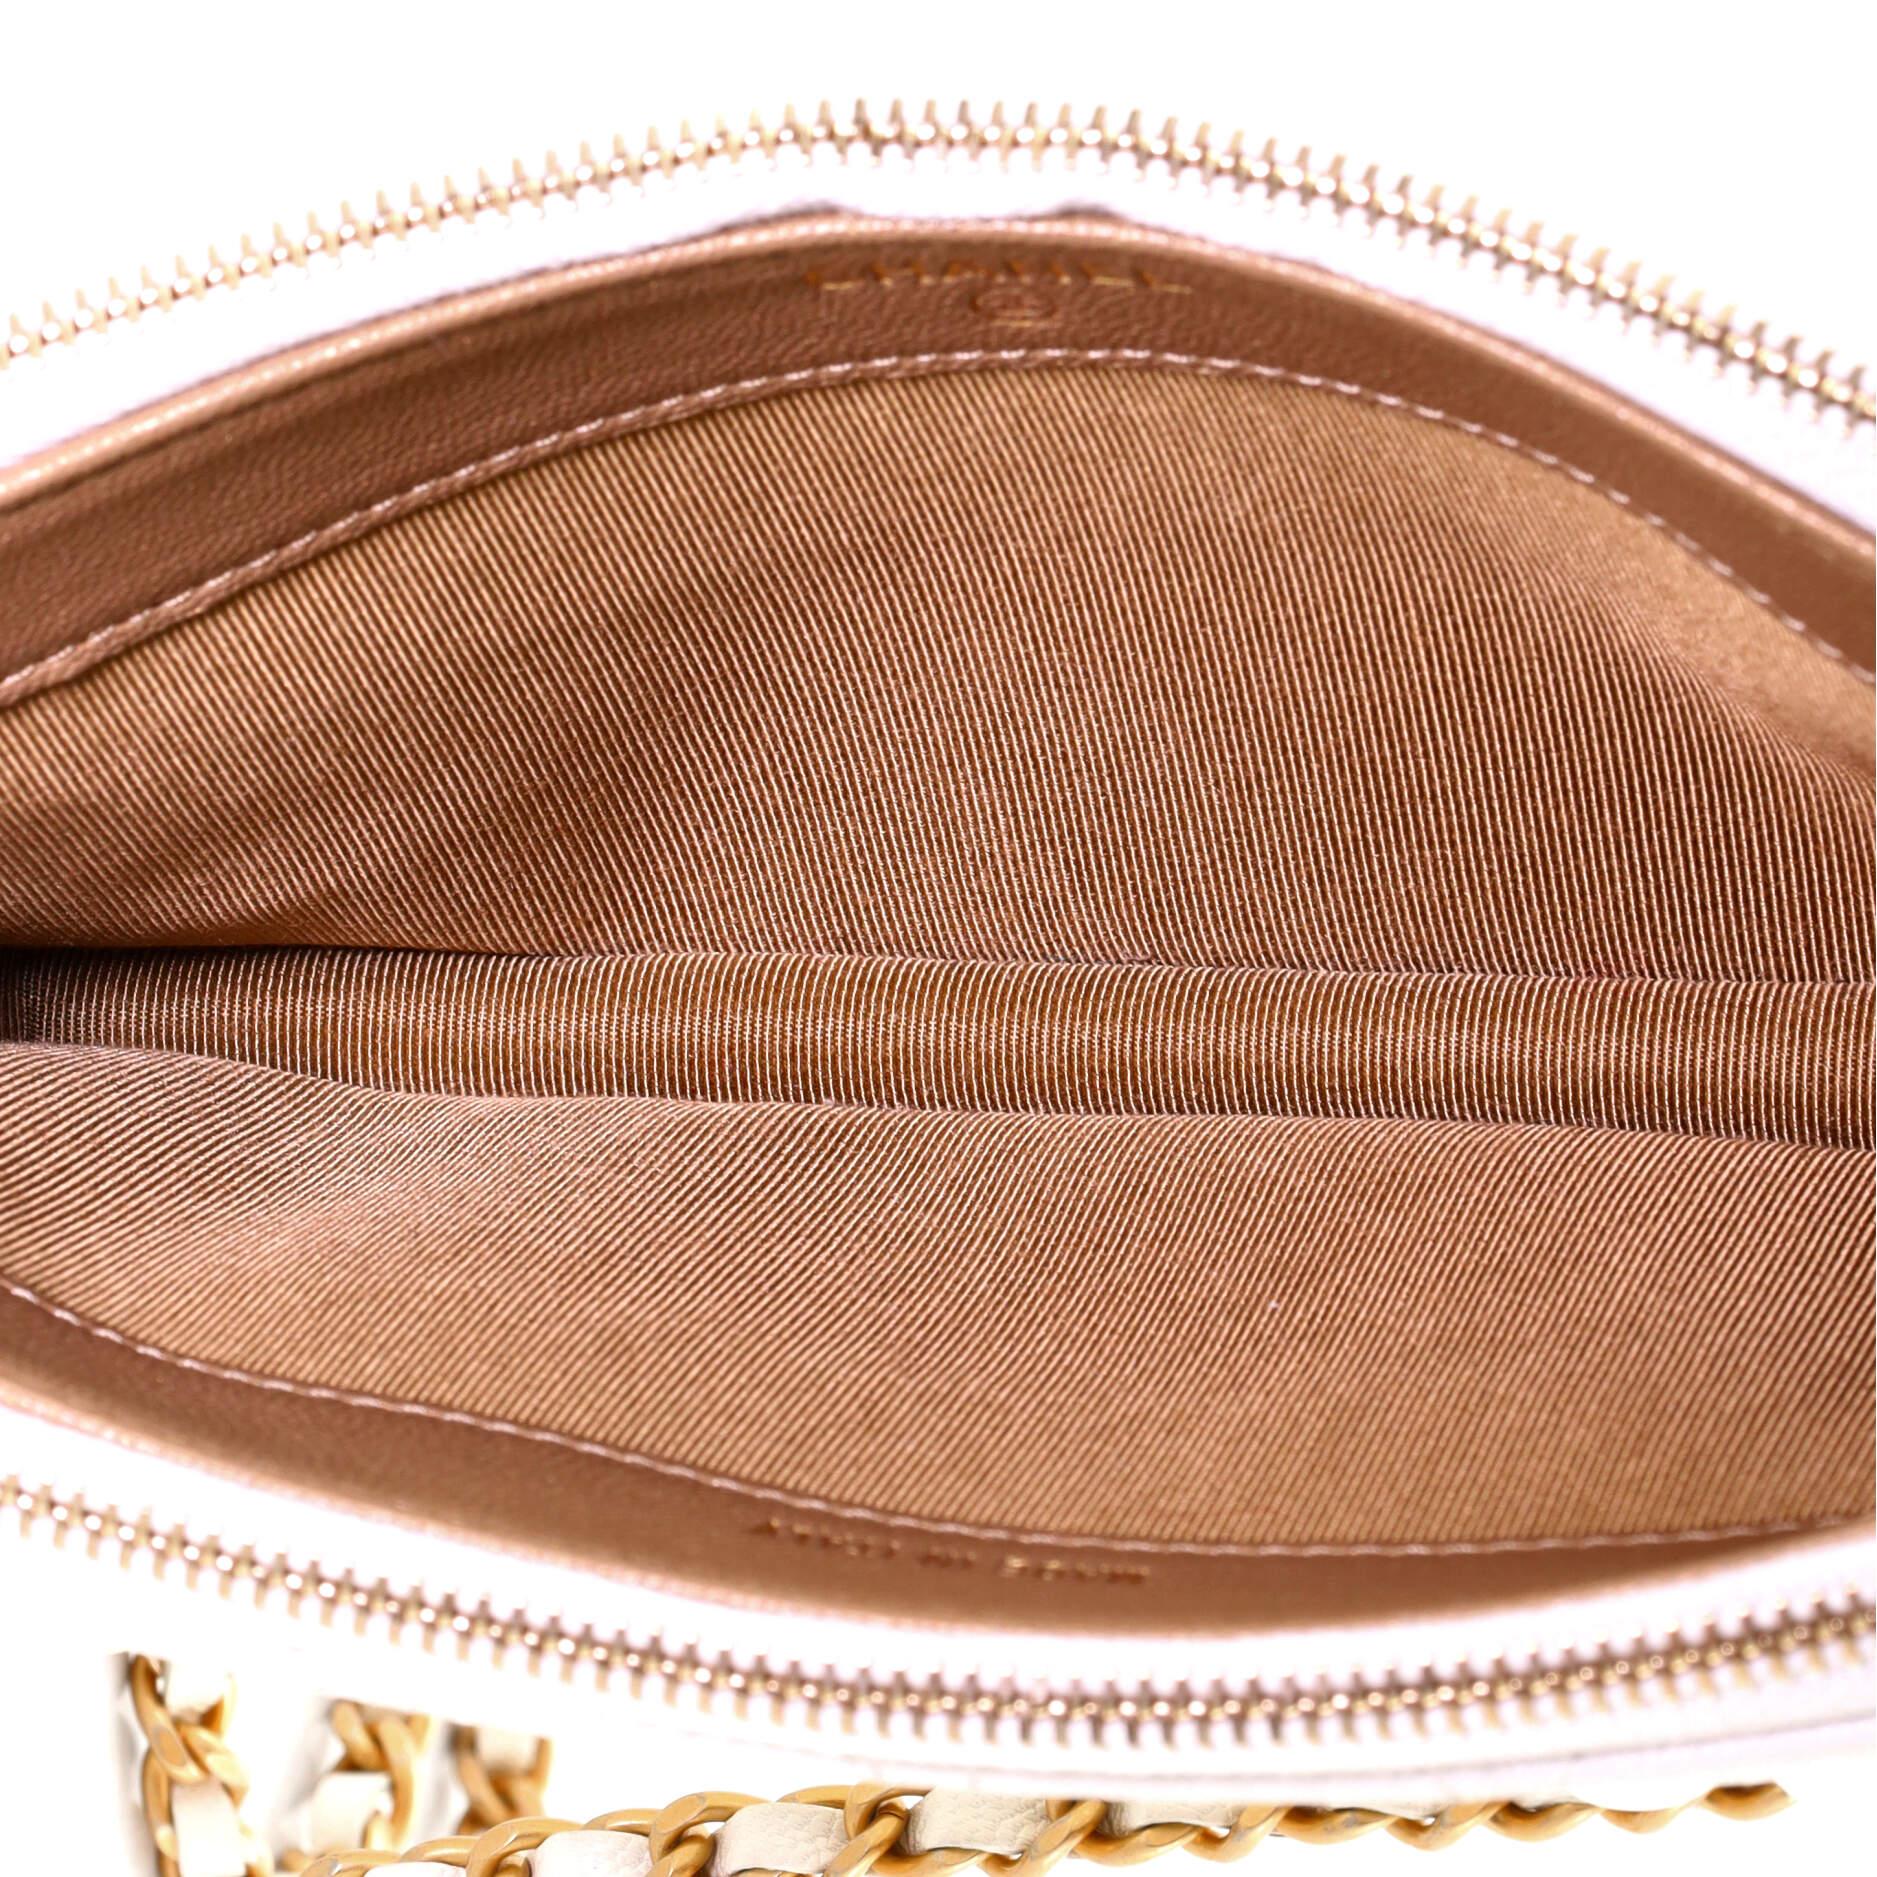 Women's or Men's Chanel Chic Pearls Double Zip Clutch with Chain Quilted Lambskin